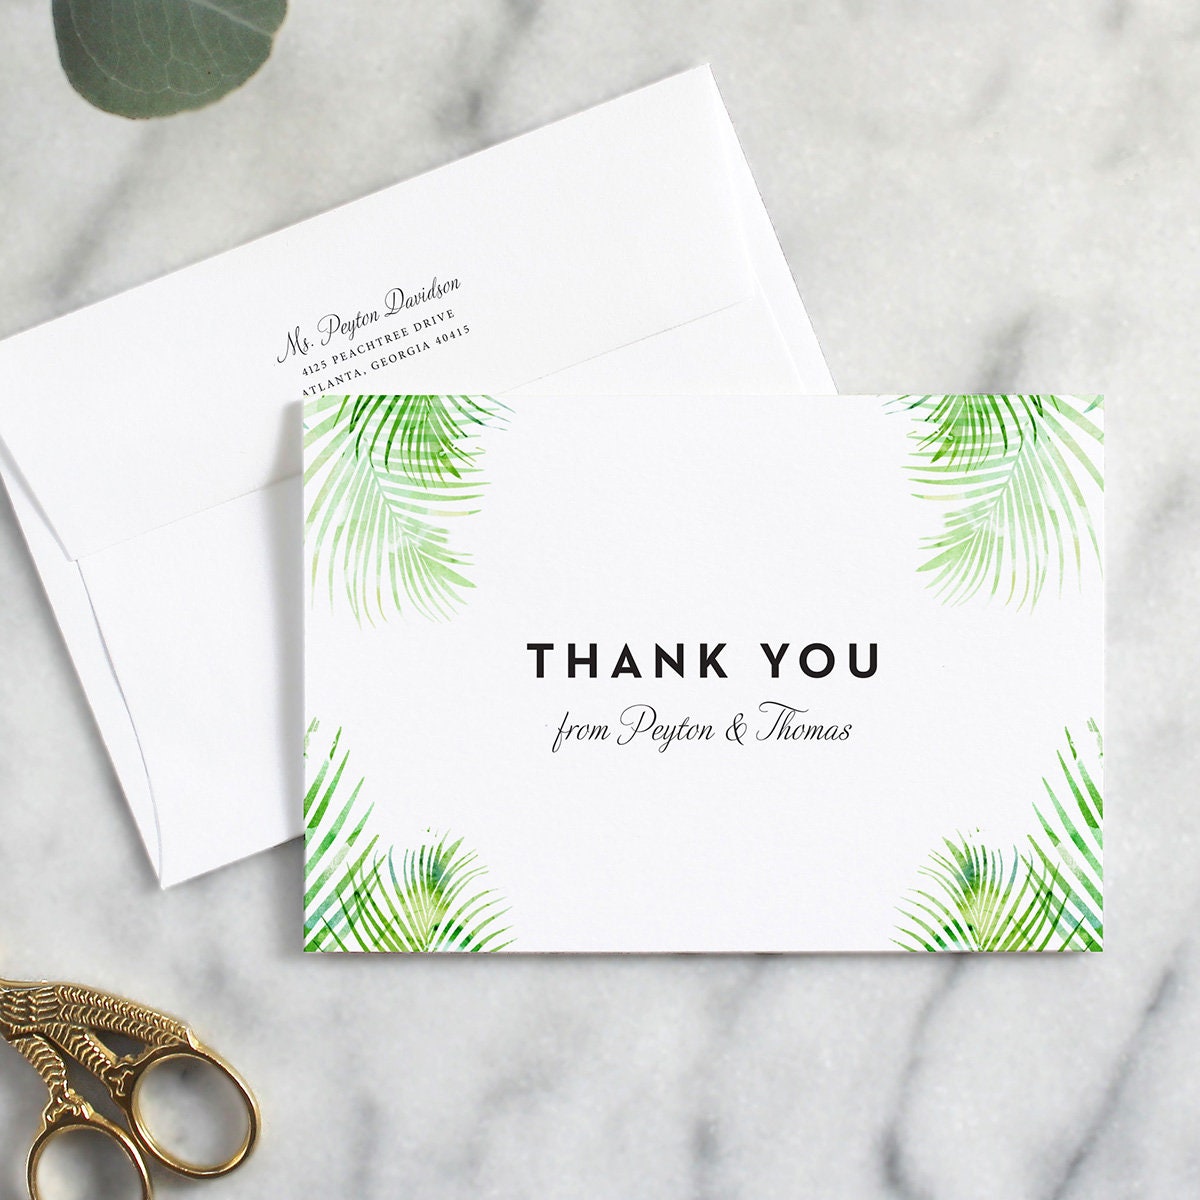 Wedding Thank You Note With Palm Leaves Design, Custom Thank You Note ...